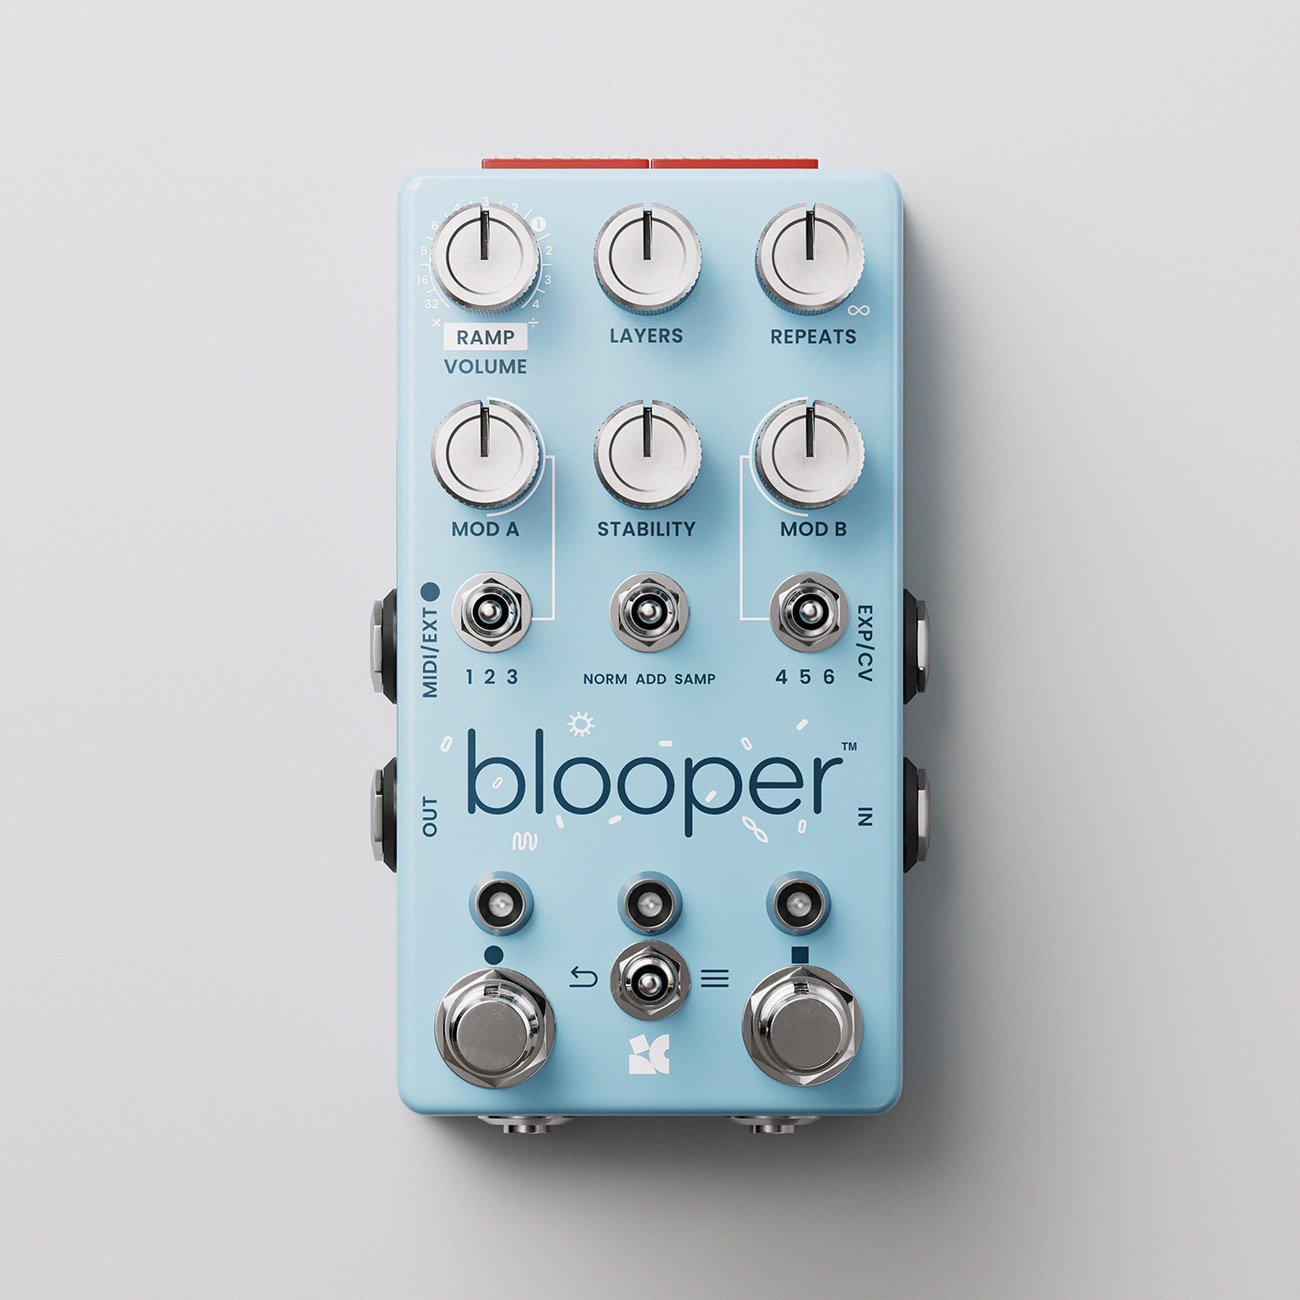 blooper — Chase Bliss